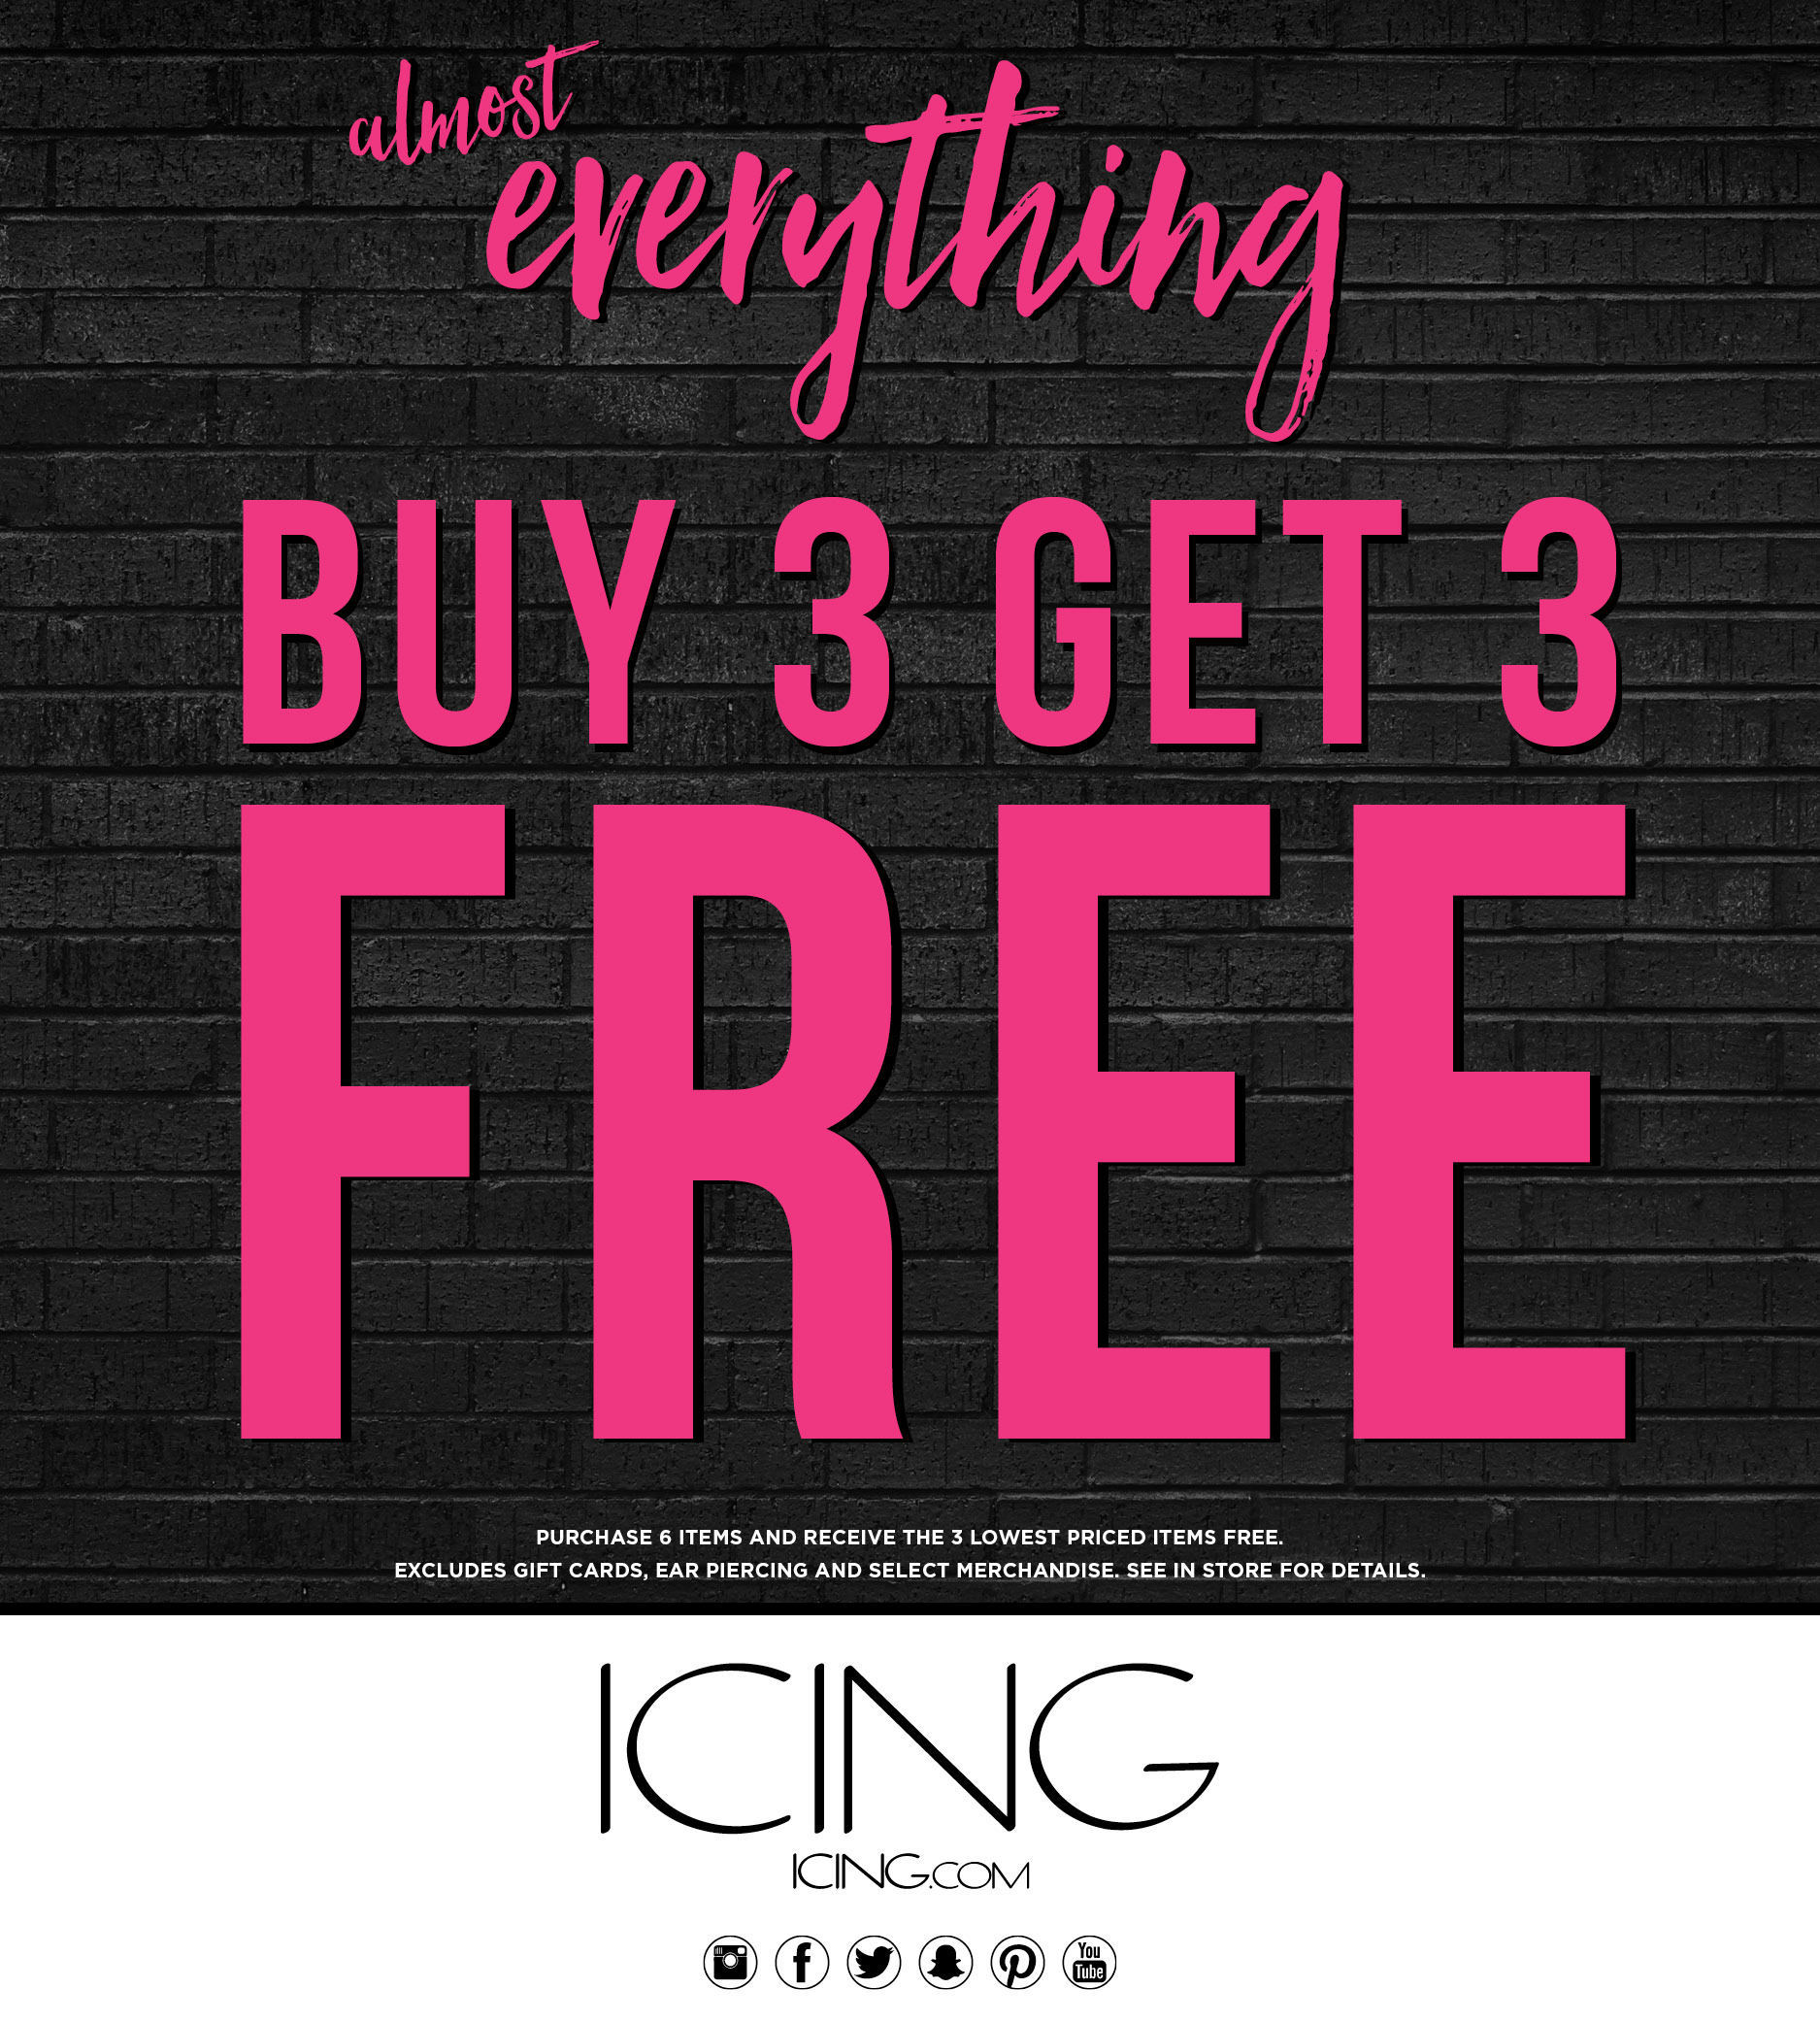 Purchase 6 items and receive the 3 lowest priced items free. Excludes gift cards, ear piercing and select merchandise. See in store for details.